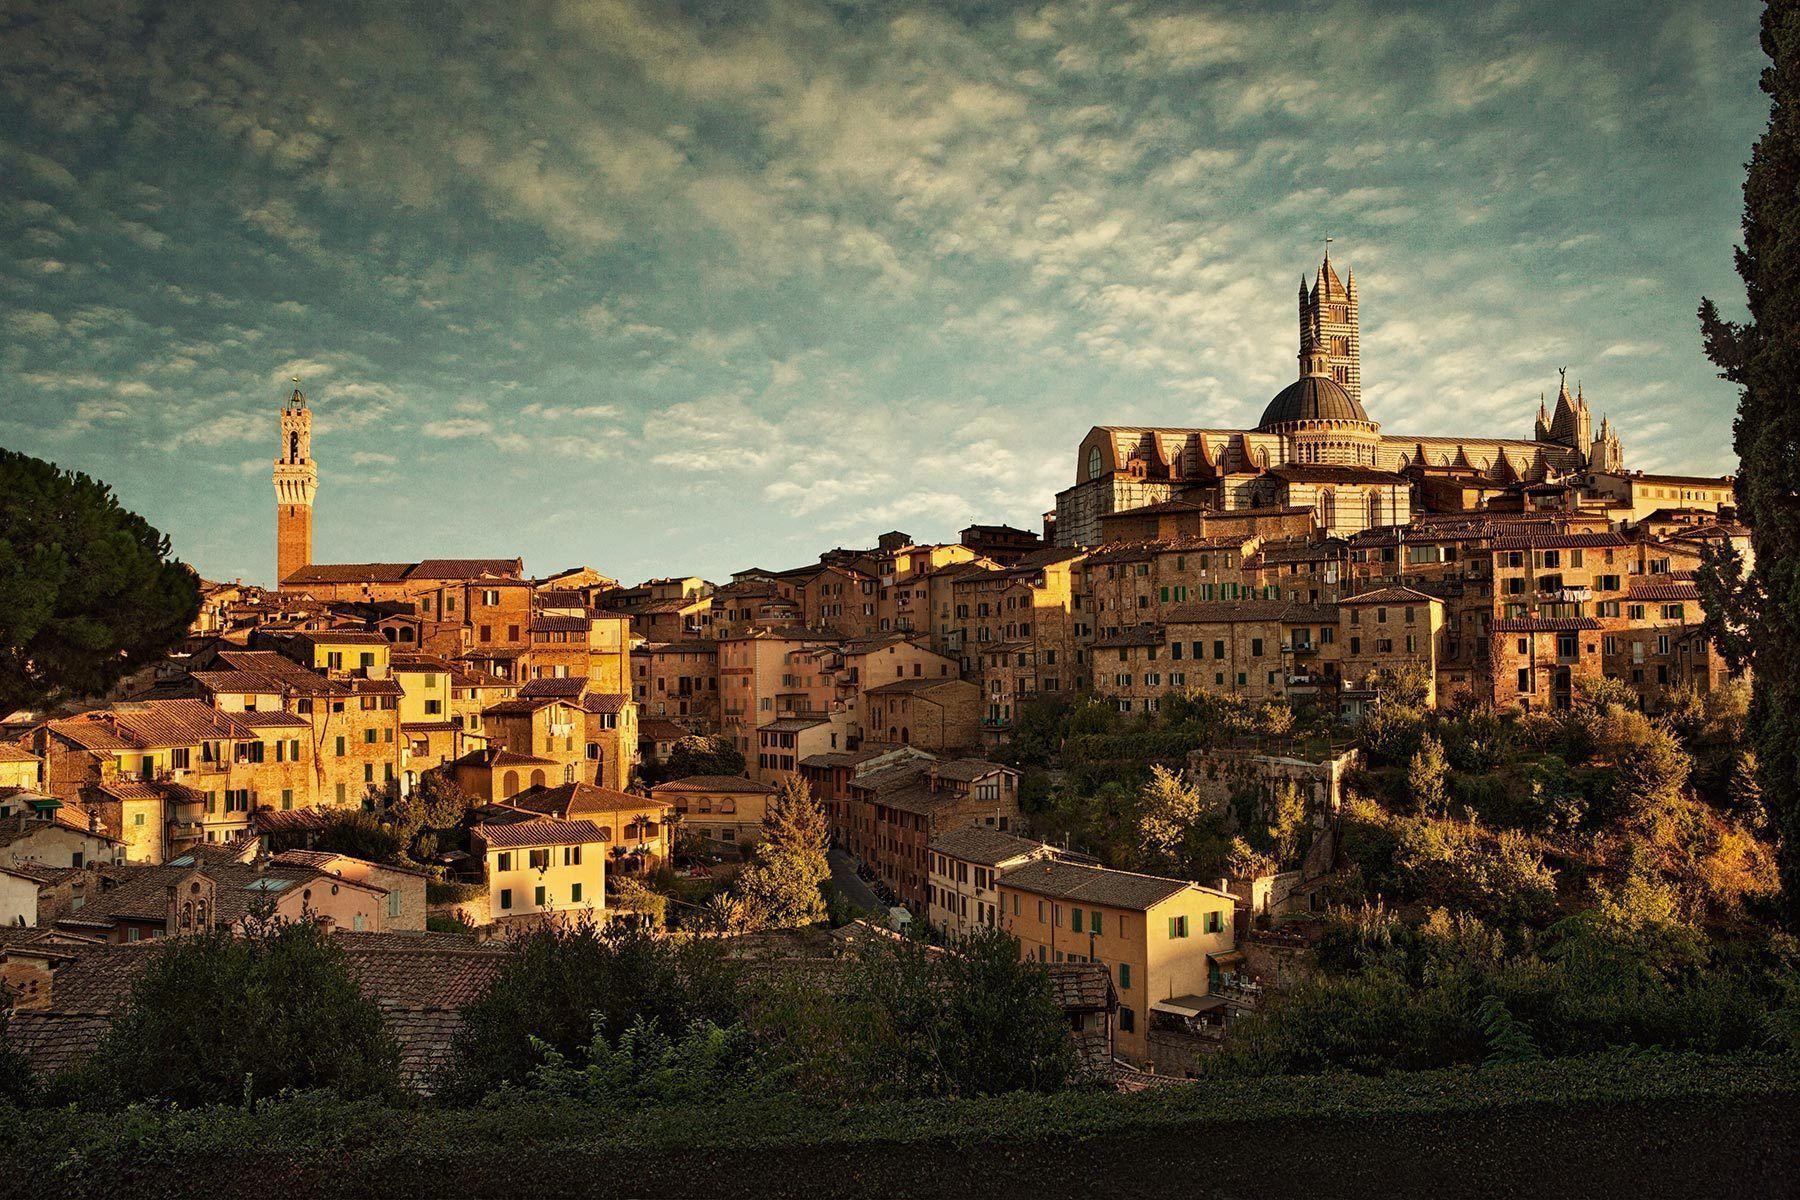 Panorama of the city of Siena, Italy wallpaper and image